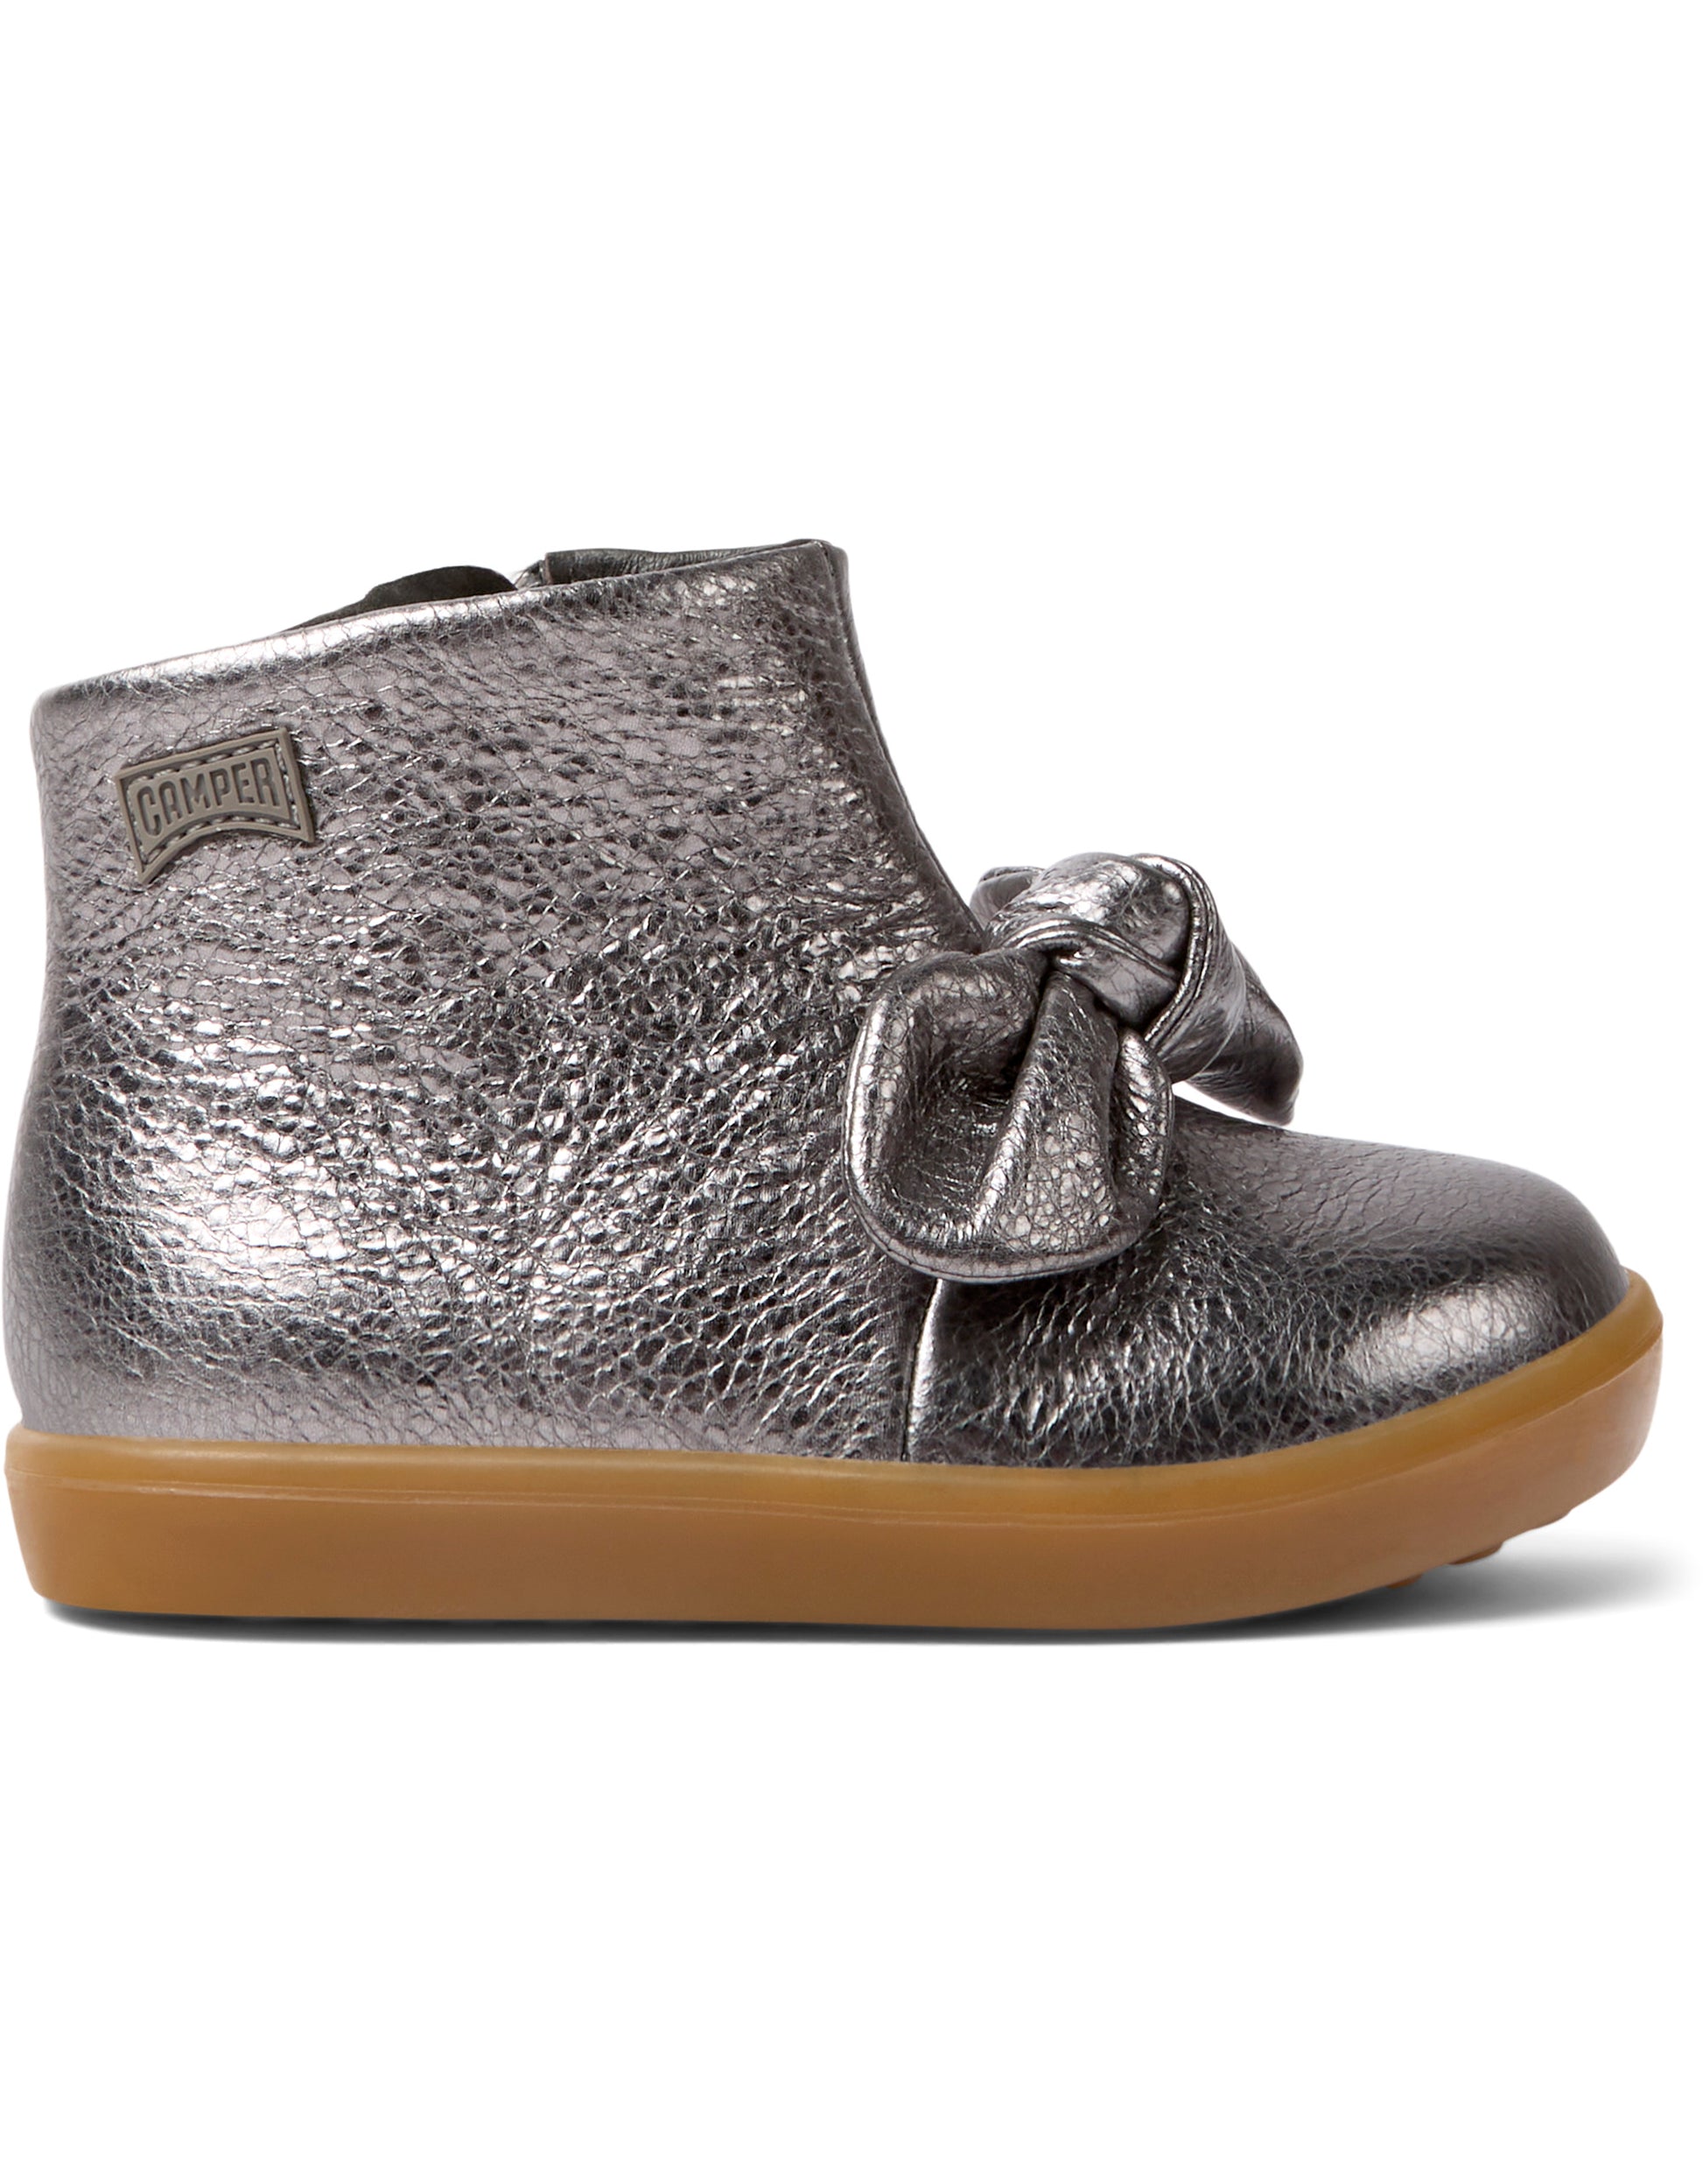 A girls ankle boot by Camper, style K900267-006 in dark silver with bow front and zip fastening. Right side view.,